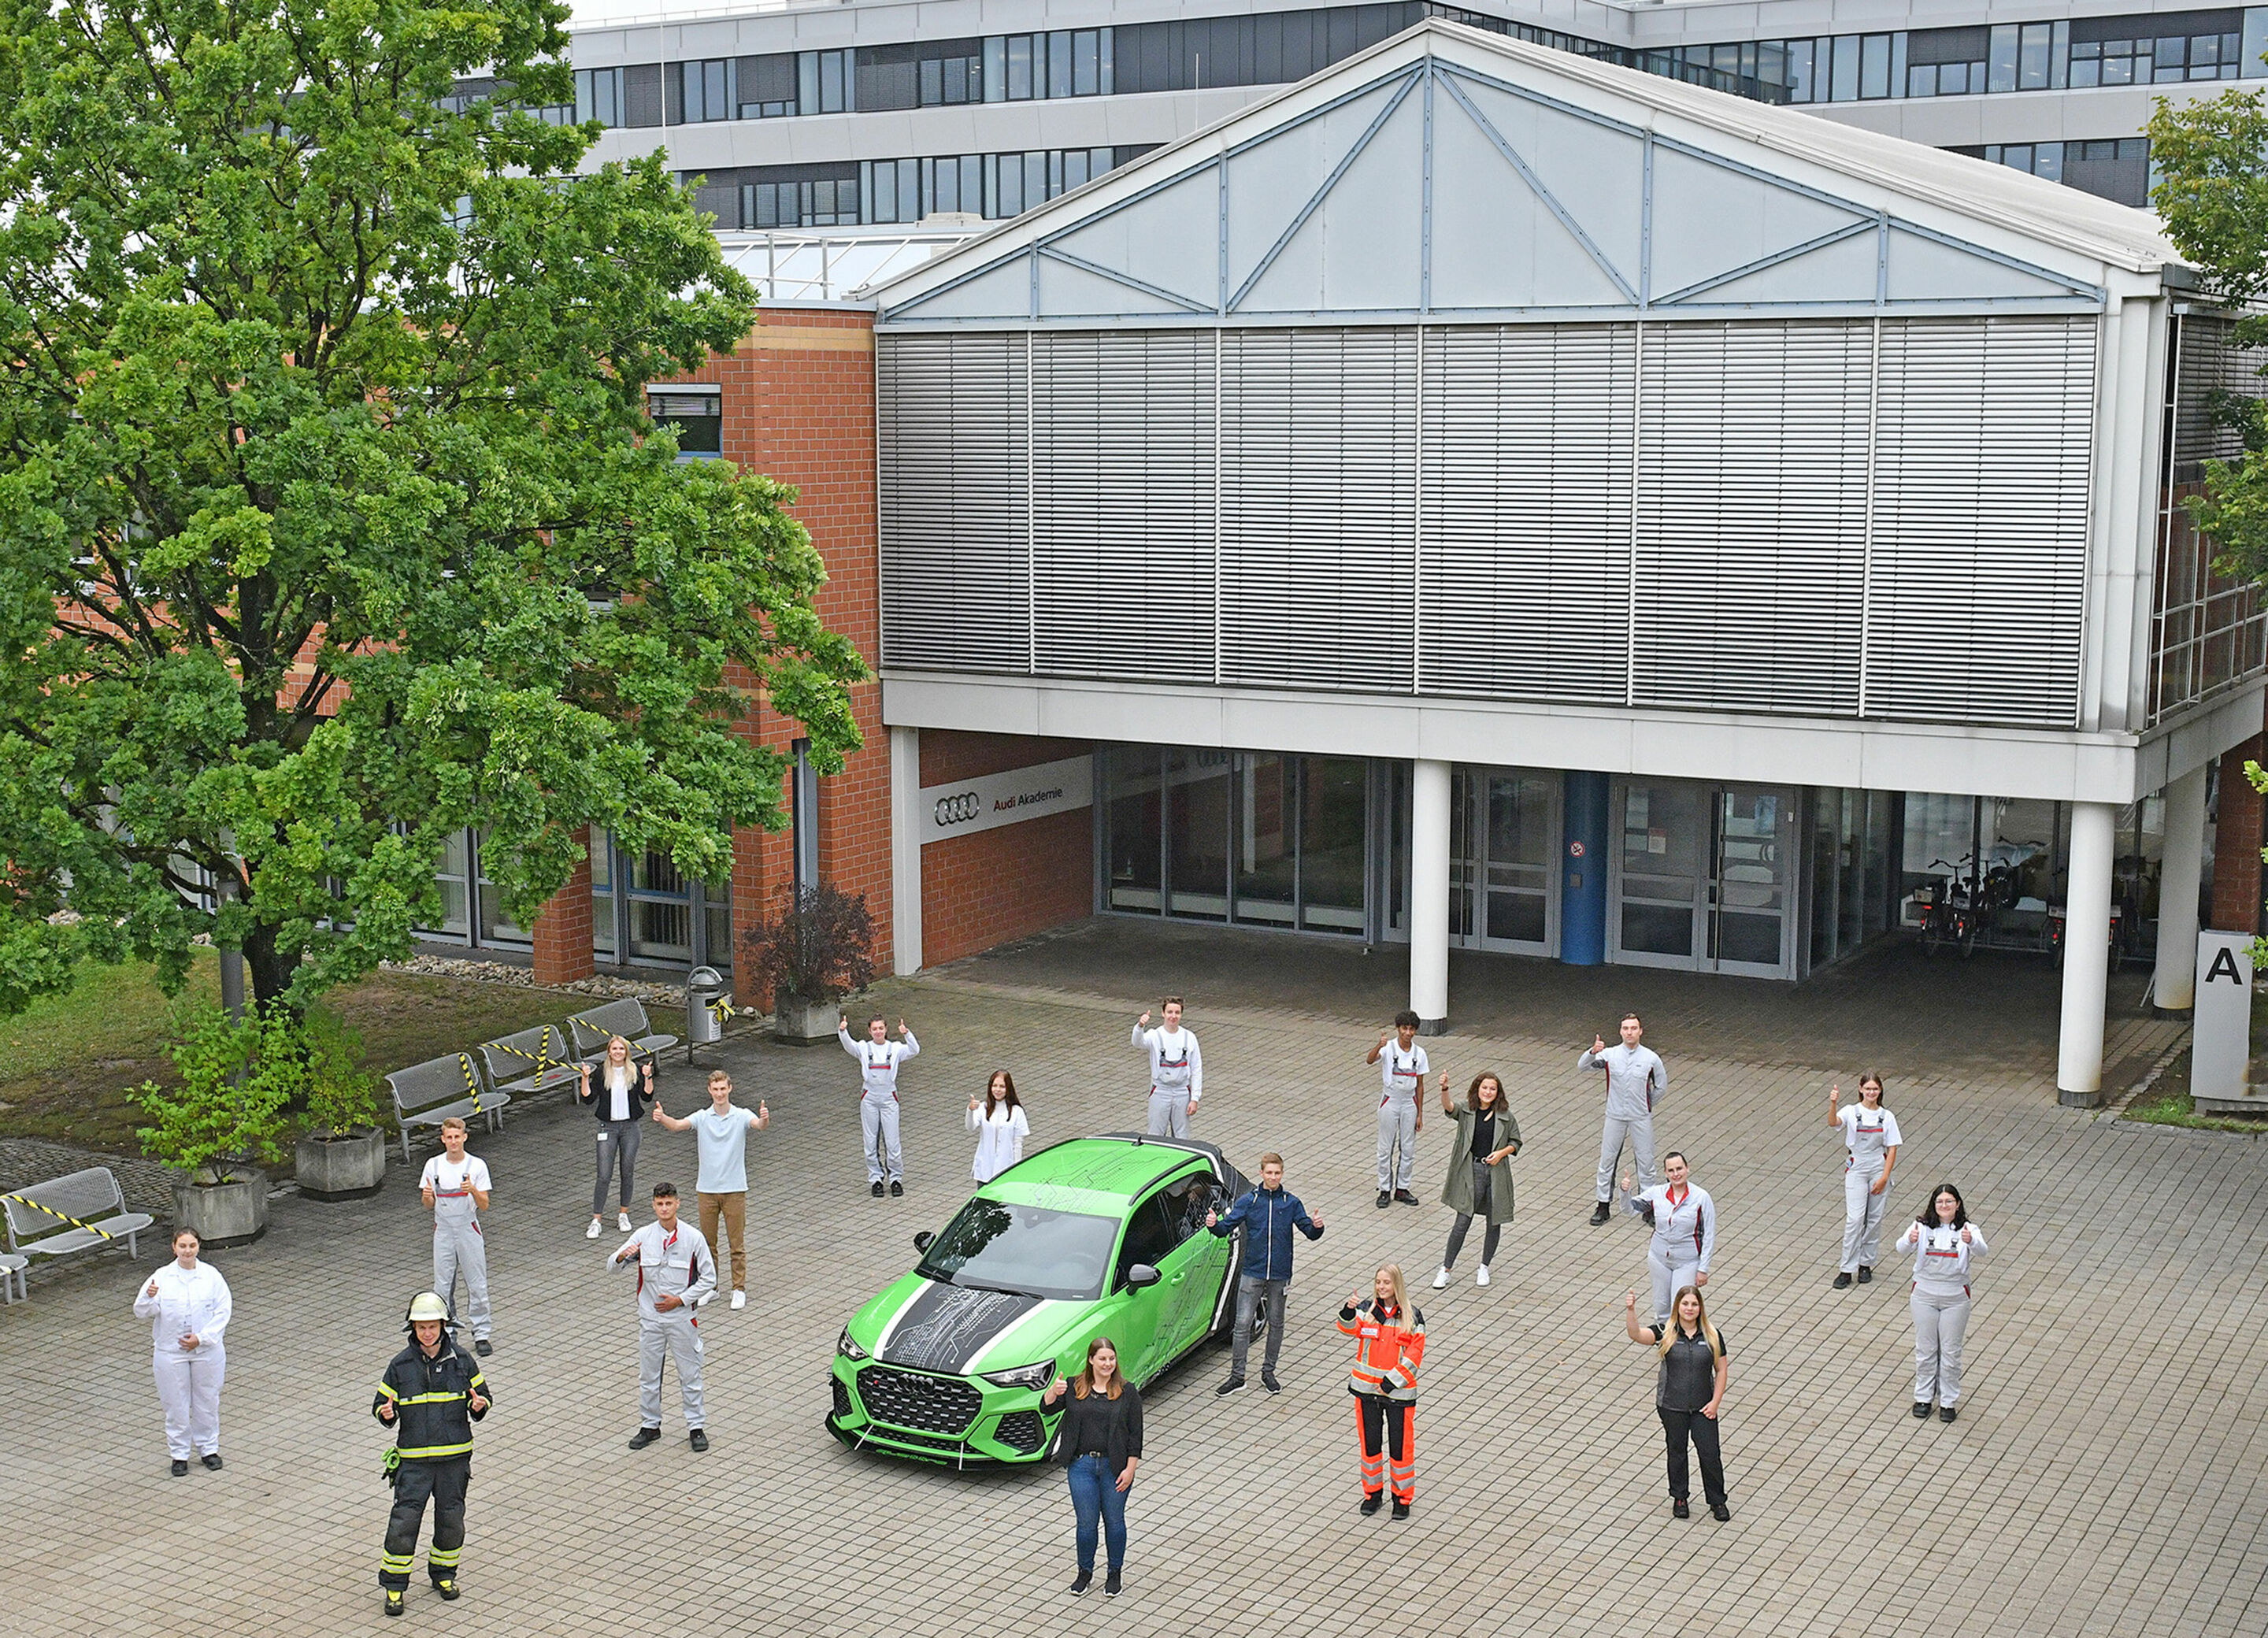 Launching young careers: Audi welcomes new apprentices